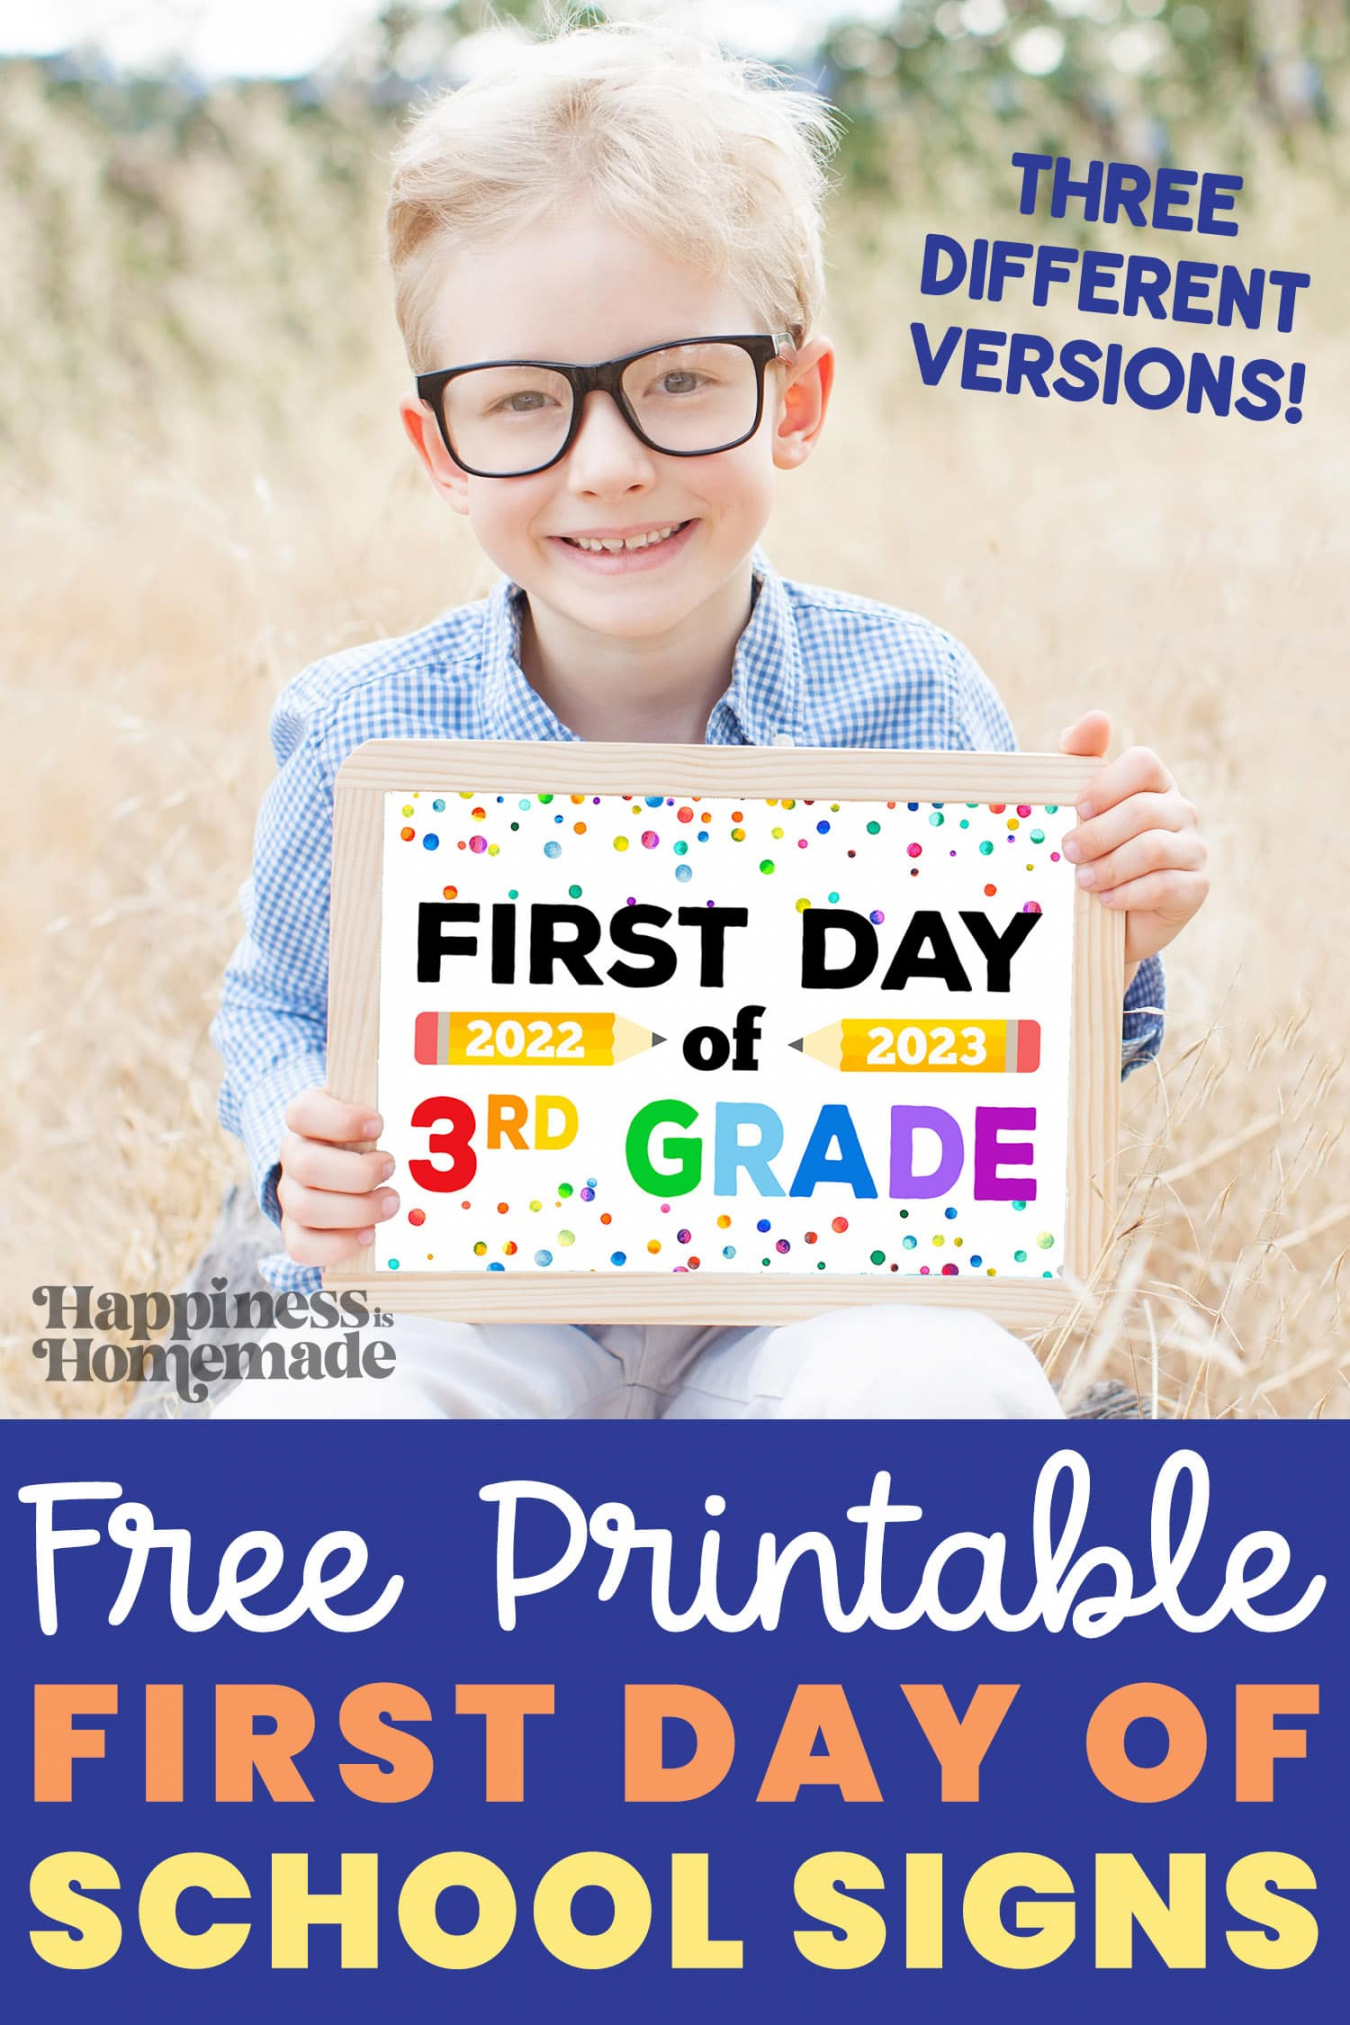 Free Printable First Day of School Signs - - Happiness is  - FREE Printables - First Day Of School Signs Free Printable